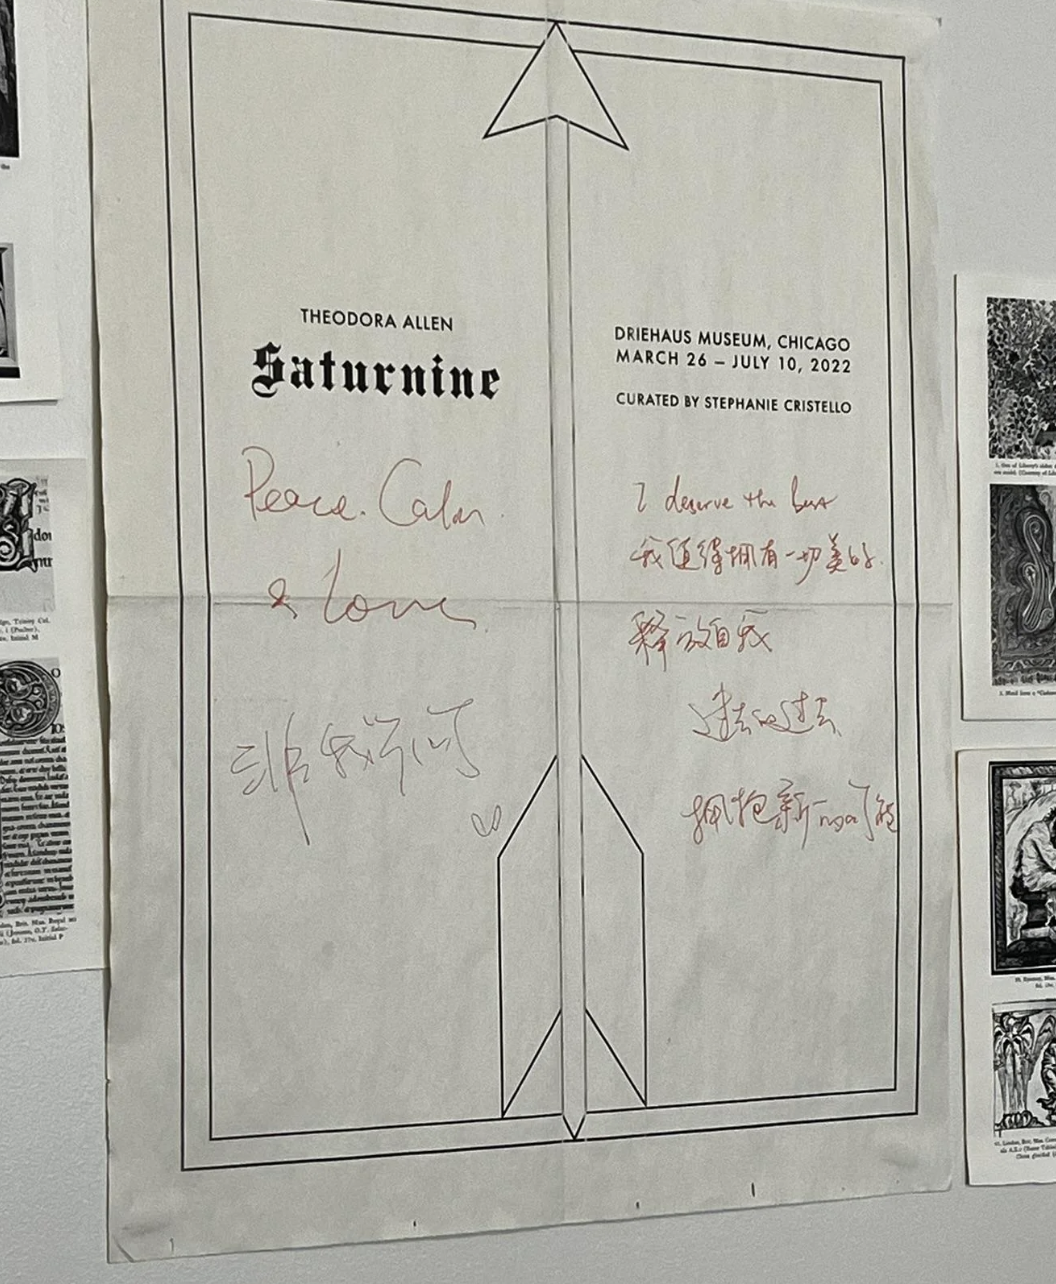 Poster of Theodora Allen&#x27;s &#x27;Saturnine&#x27; exhibition with signatures and an arrow illustration. Text details dates and museum location